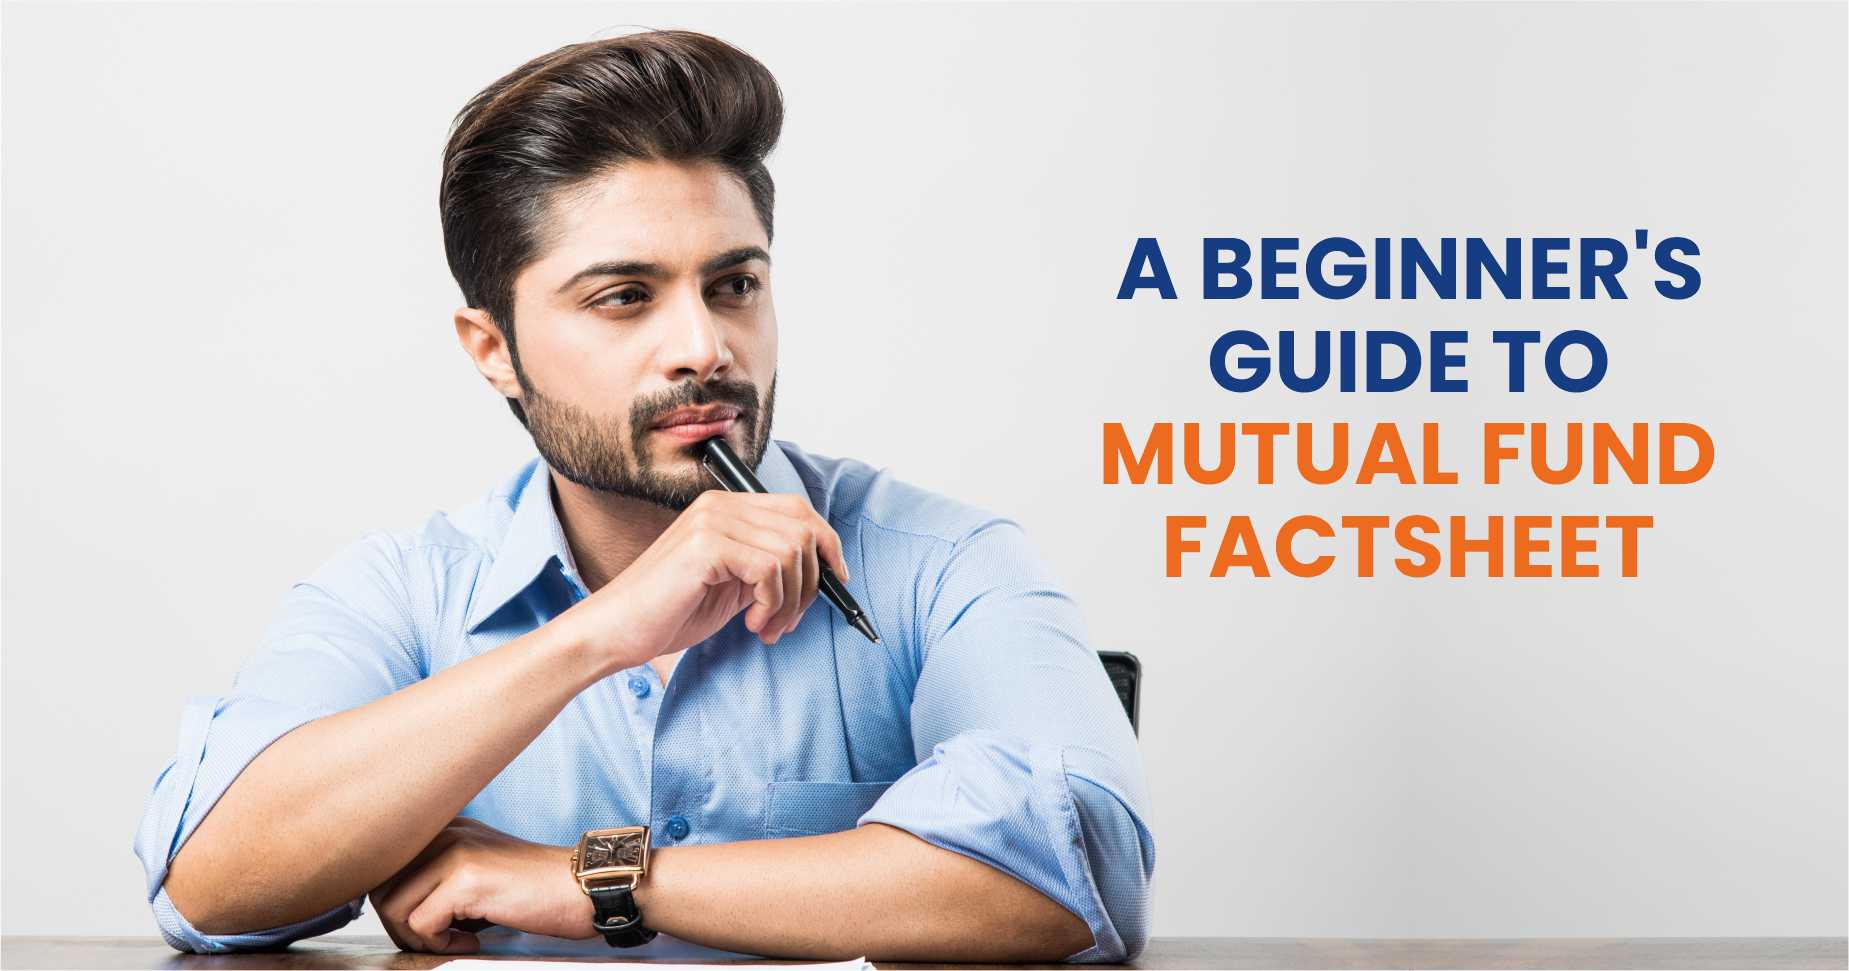 A Beginner's Guide to Mutual Fund Factsheet